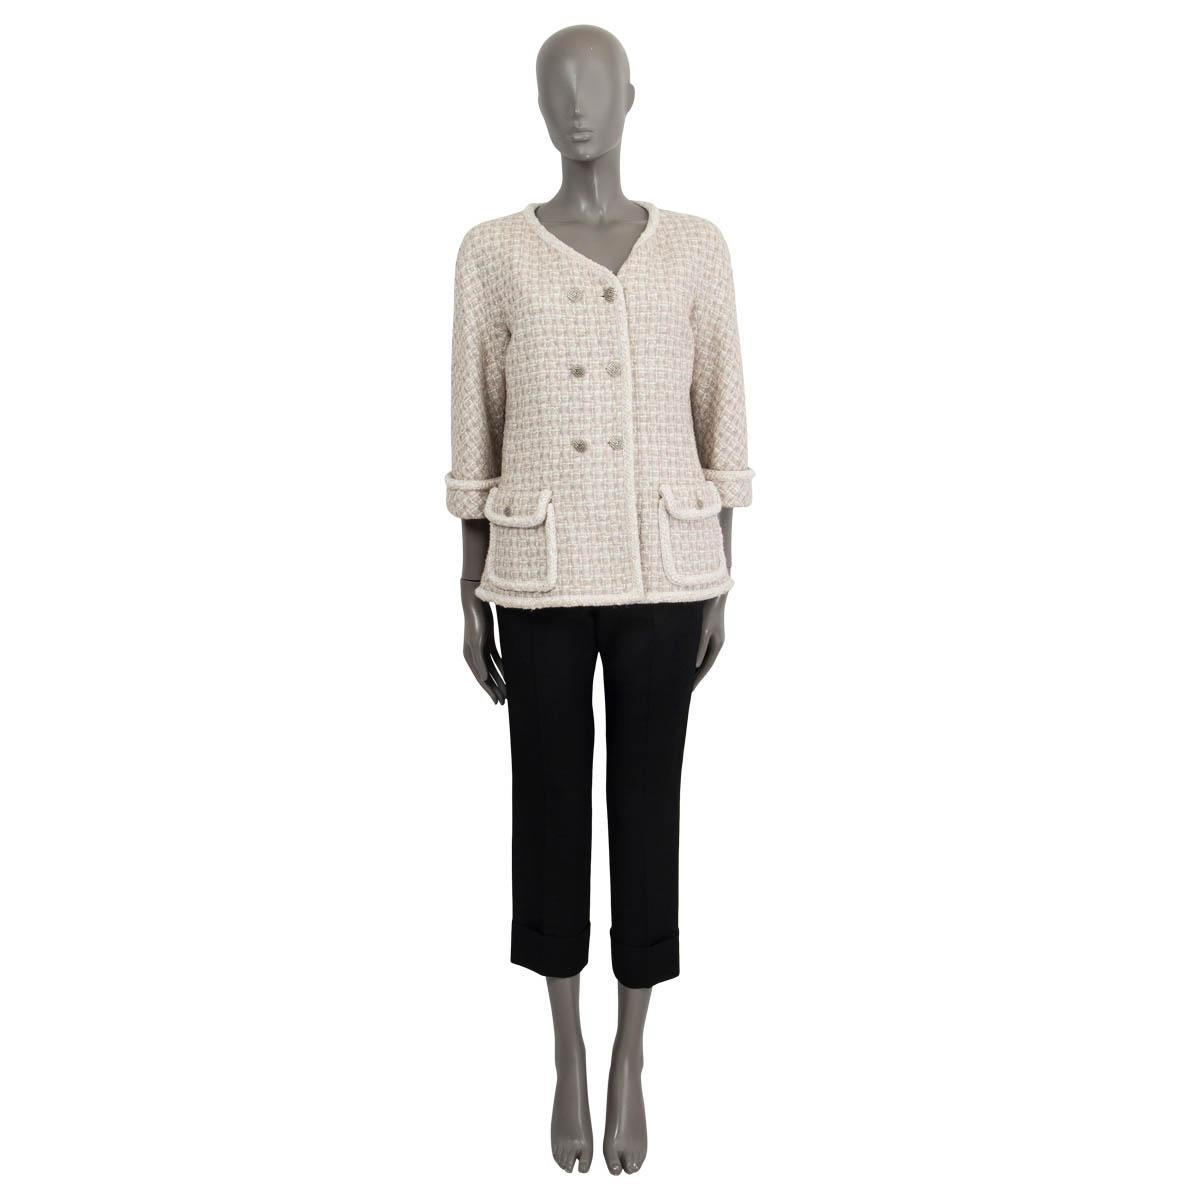 100% authentic Chanel collarless double-breasted tweed jacket in ivory, grey and taupe viscose (45%), cotton (19%), wool (15%), polyurethane (12%) and polyamide (9%). Features braided trim and 3/4 sleeves and flap pockets on the front. Lined in silk